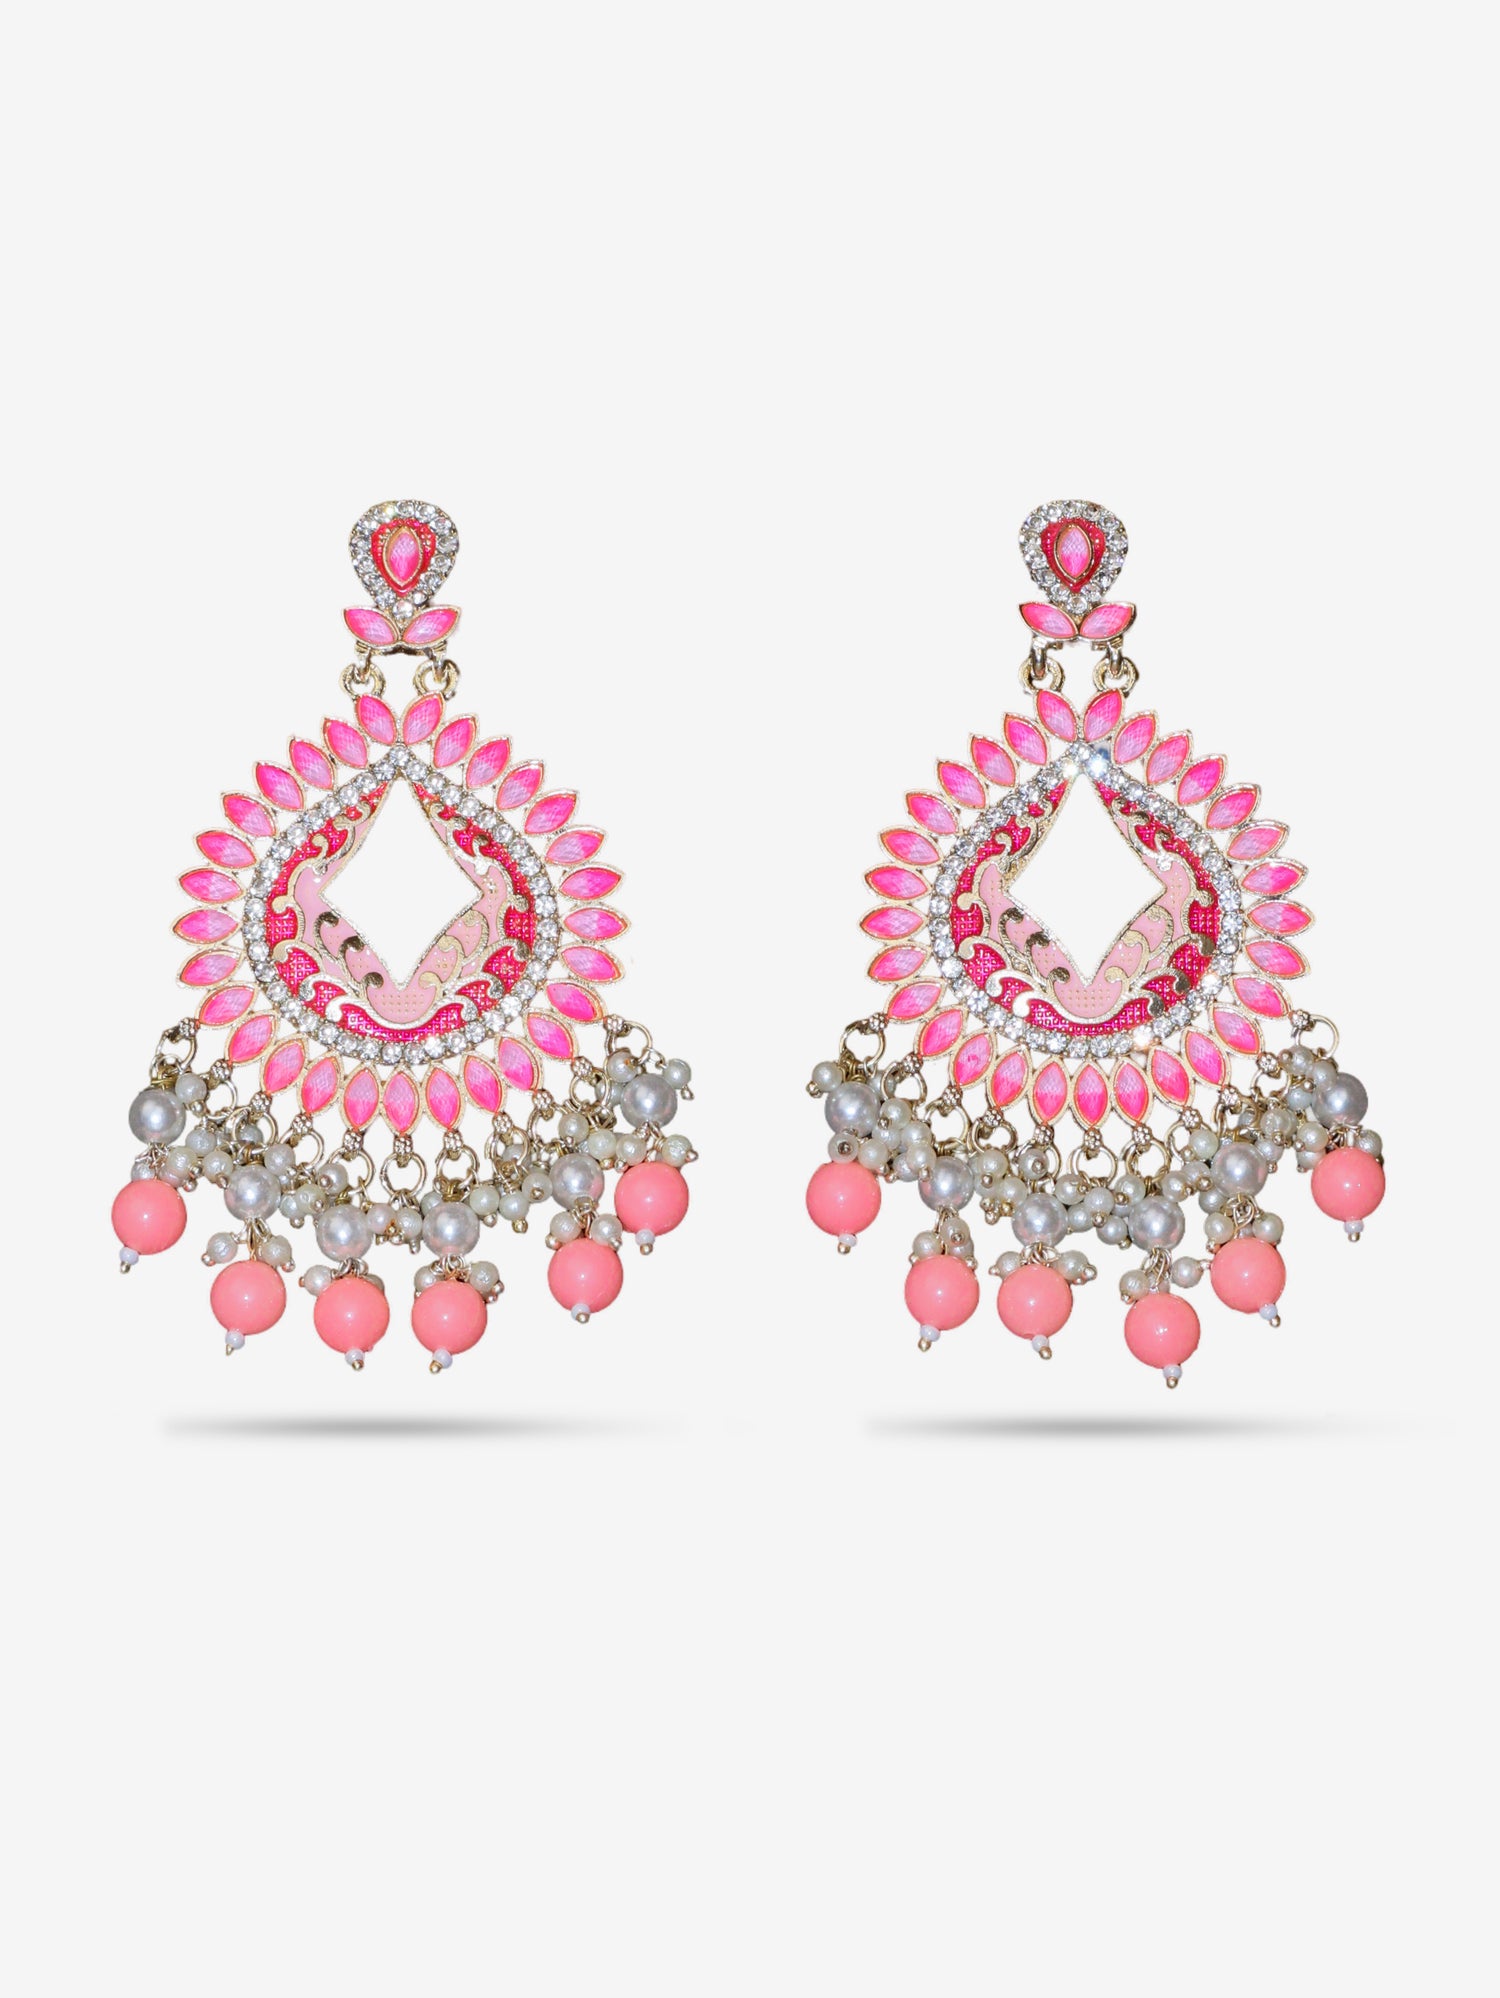 Gold-Toned &amp; Chandbali Earrings with Crystals and Pearls for Women by Shreekama Pink Fashion Jewelry for Party Festival Wedding Occasion in Noida